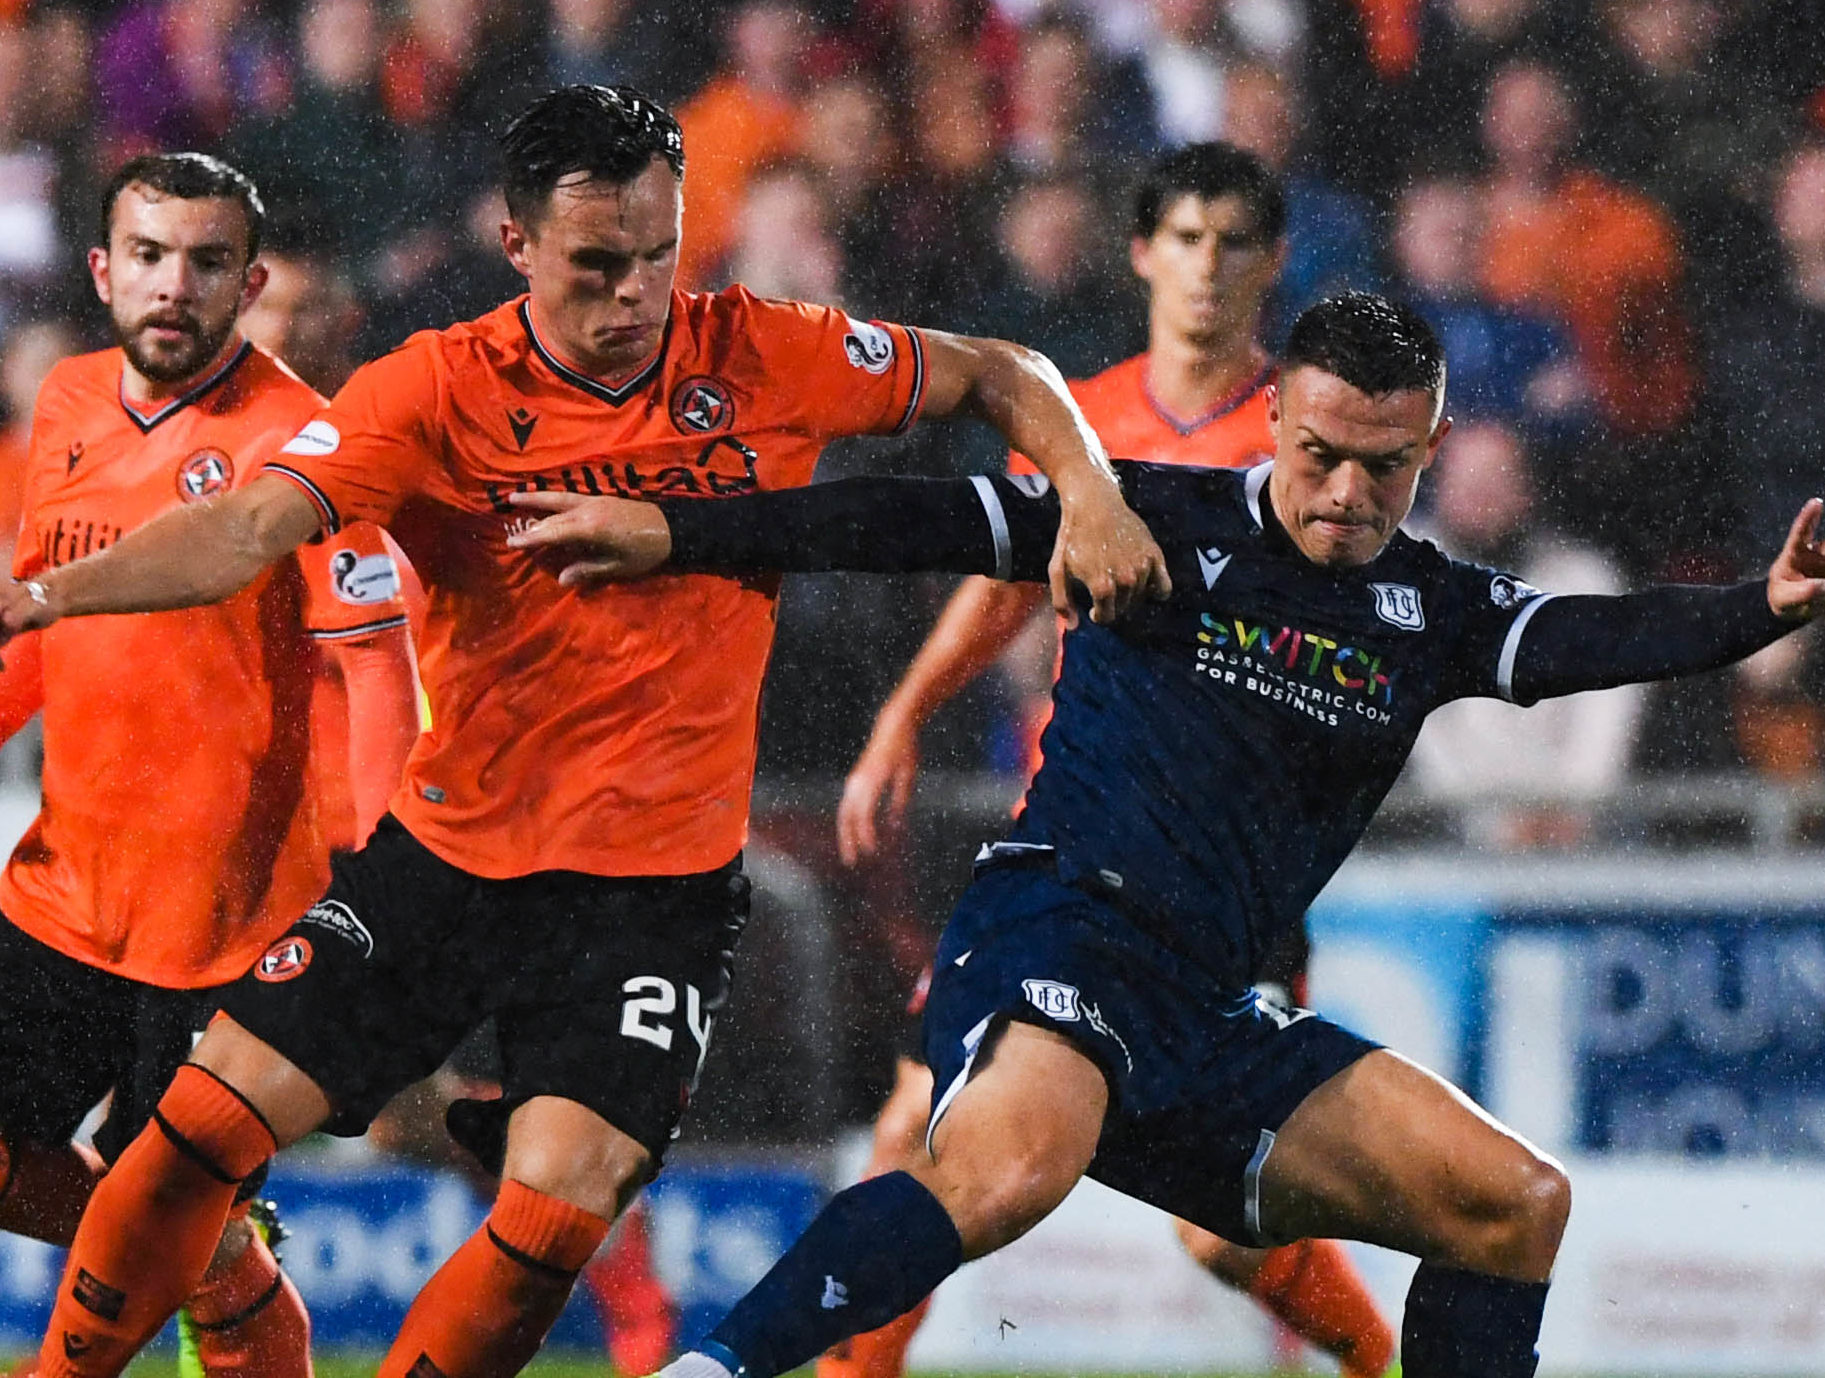 Action from the last Dundee derby.